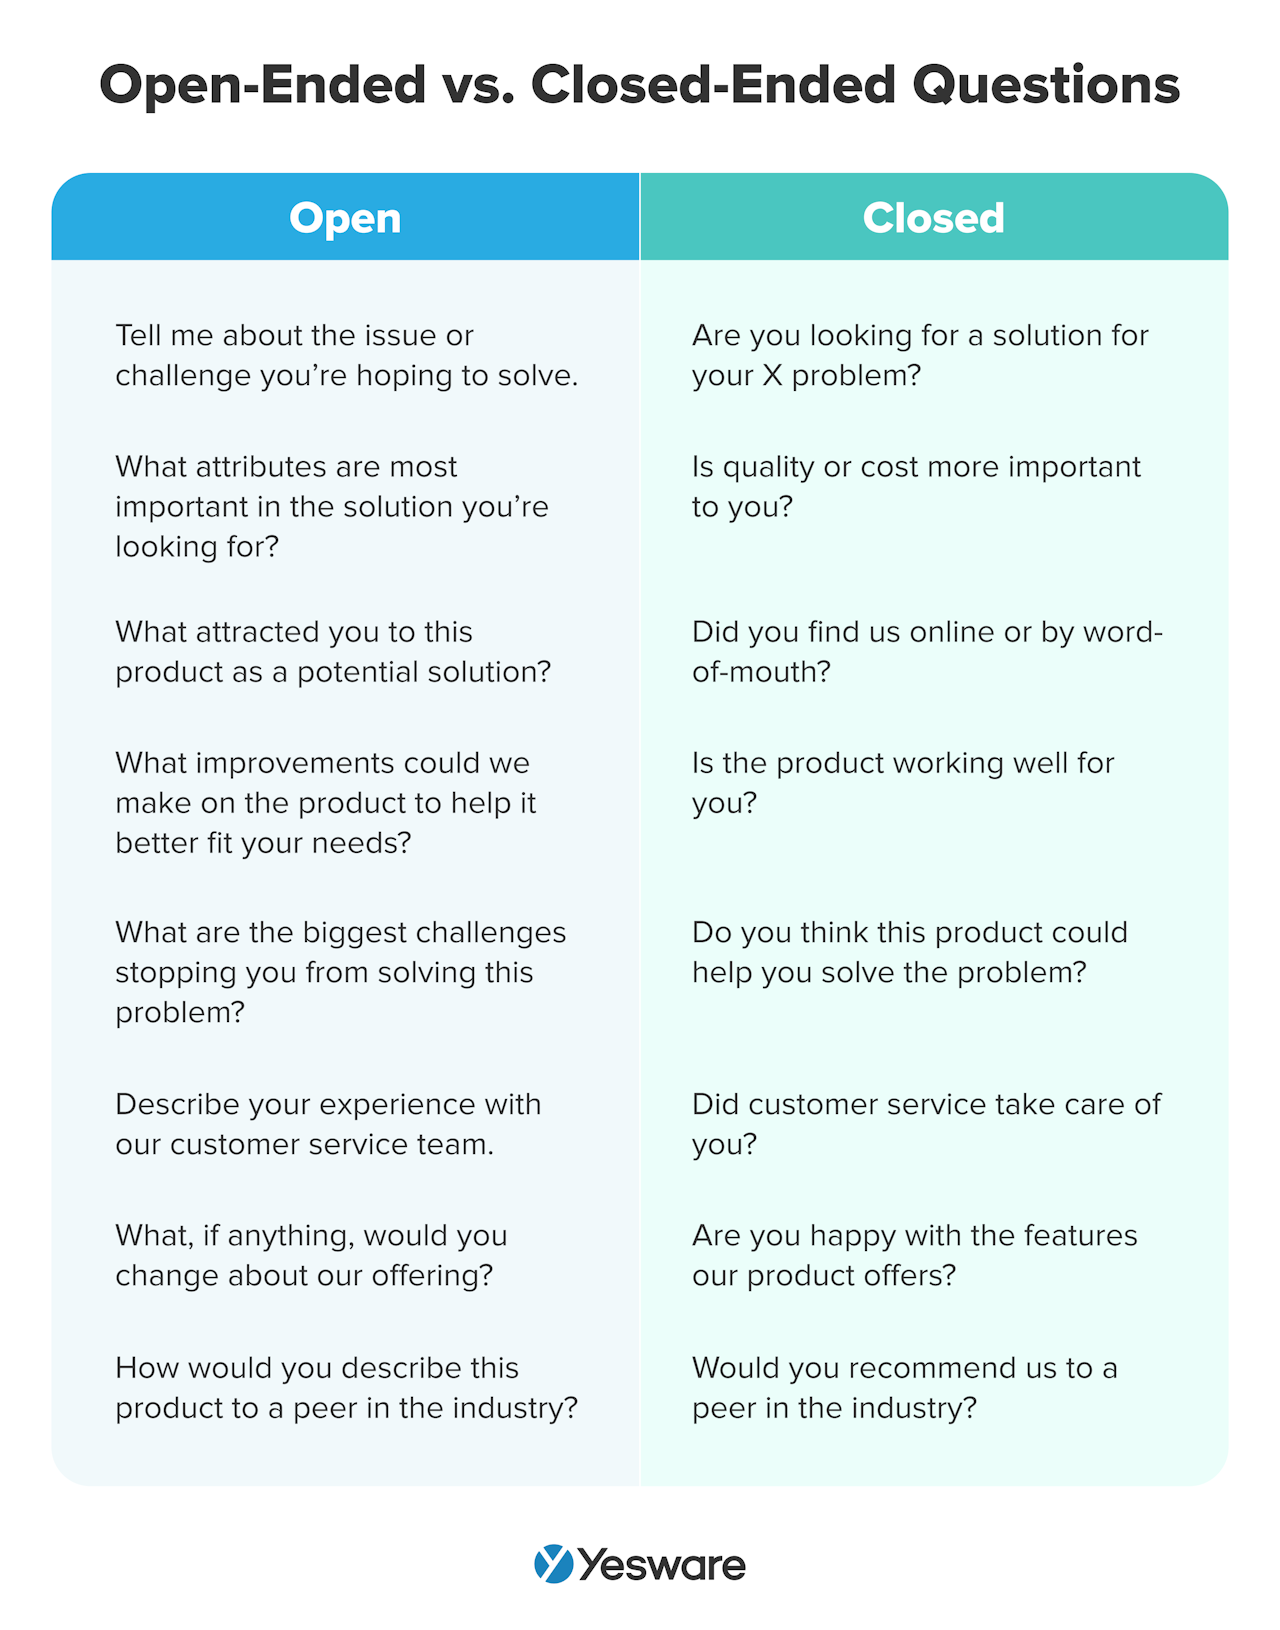 overcoming objections: ask open-ended questions